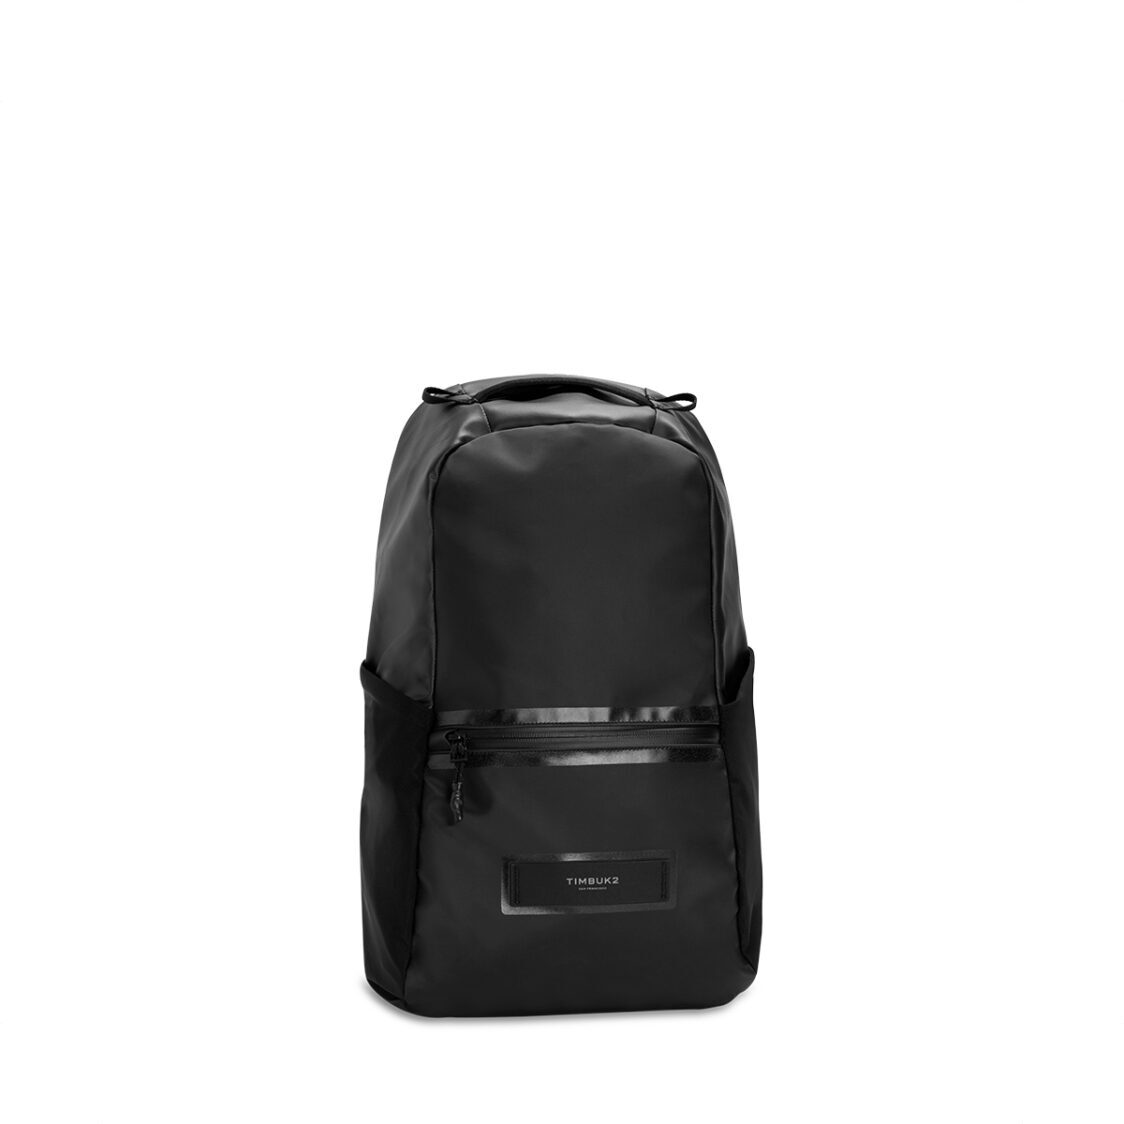 Timbuk2 Especial Shadow Commuter Backpack - Jet Black 5510-3-6114